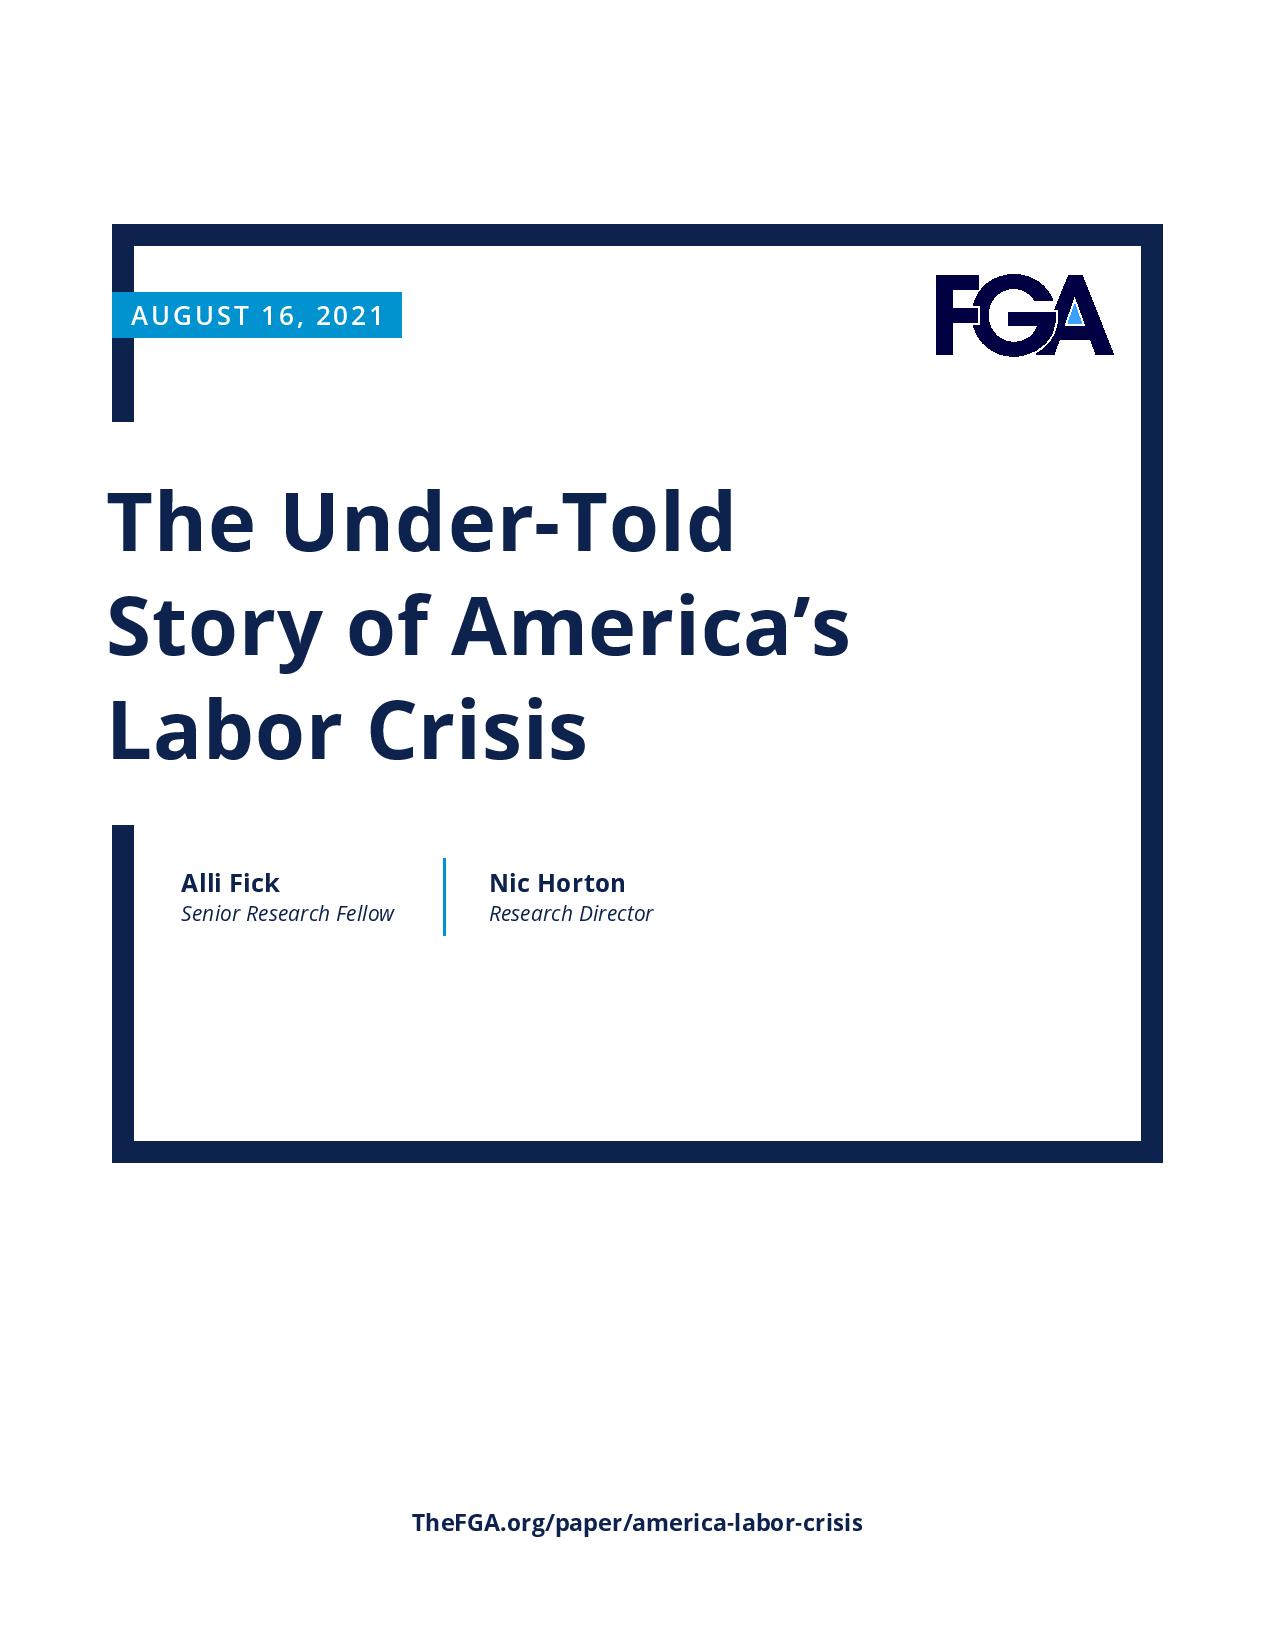 The Under-Told Story of America’s Labor Crisis